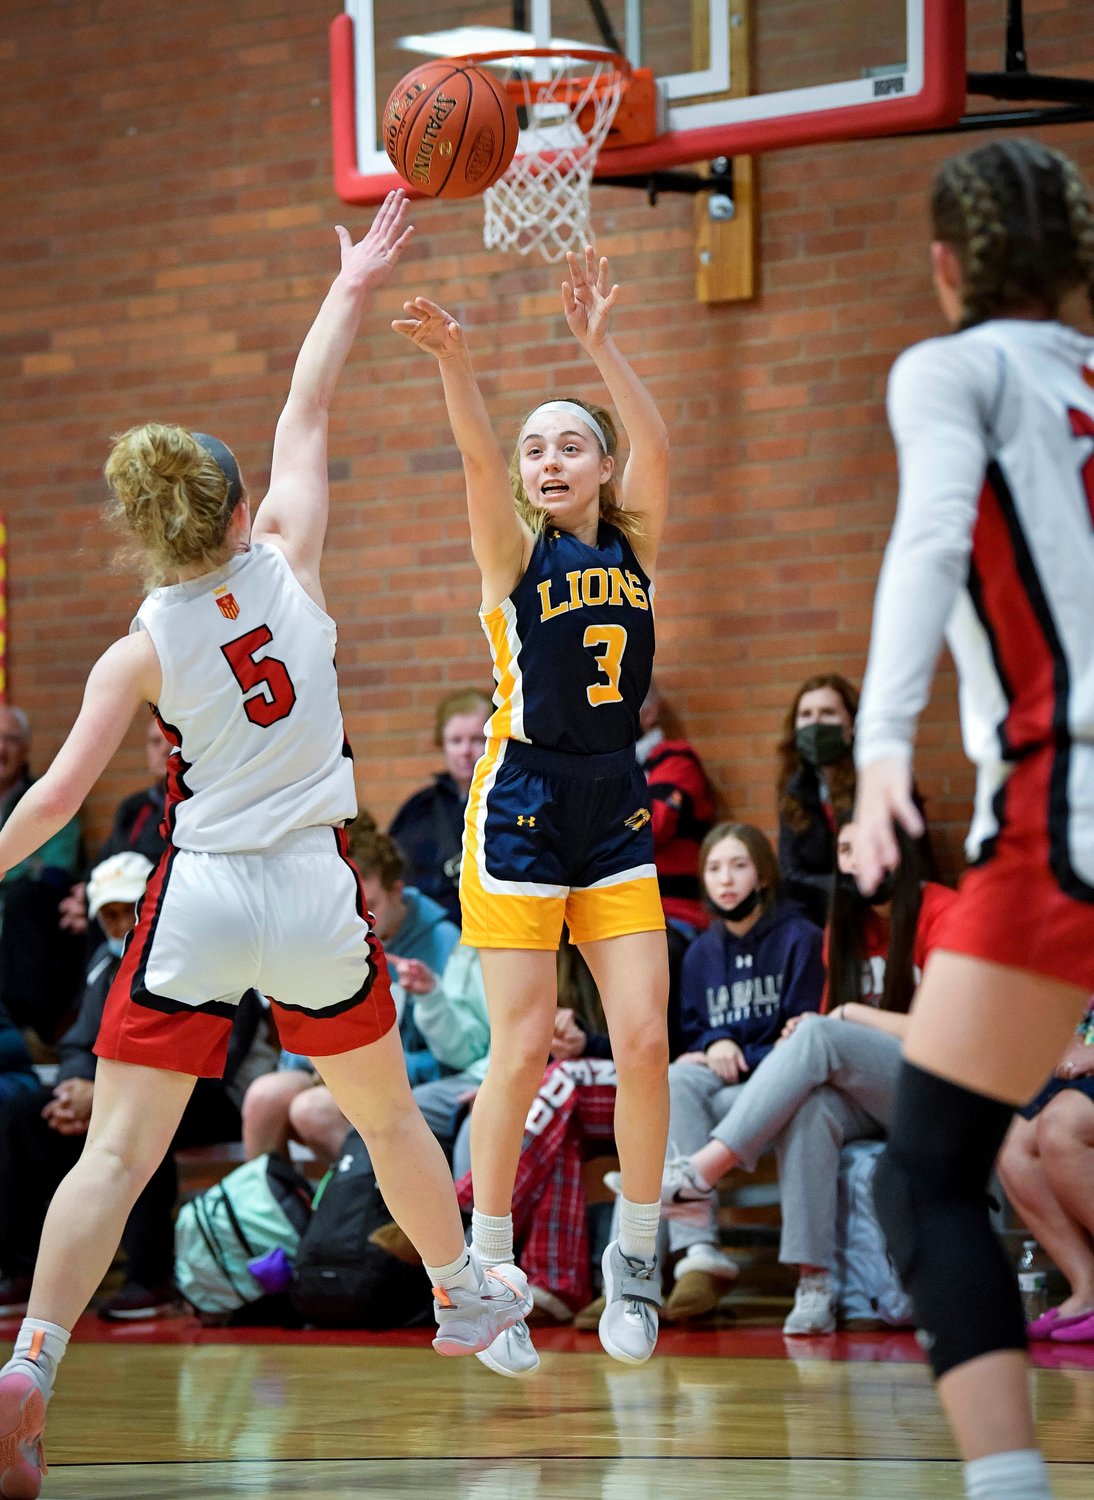 New Hope’s Madi Fasti gets a clean look for a jump shot in front of Gwynedd Mercy’s Maddie Newell.